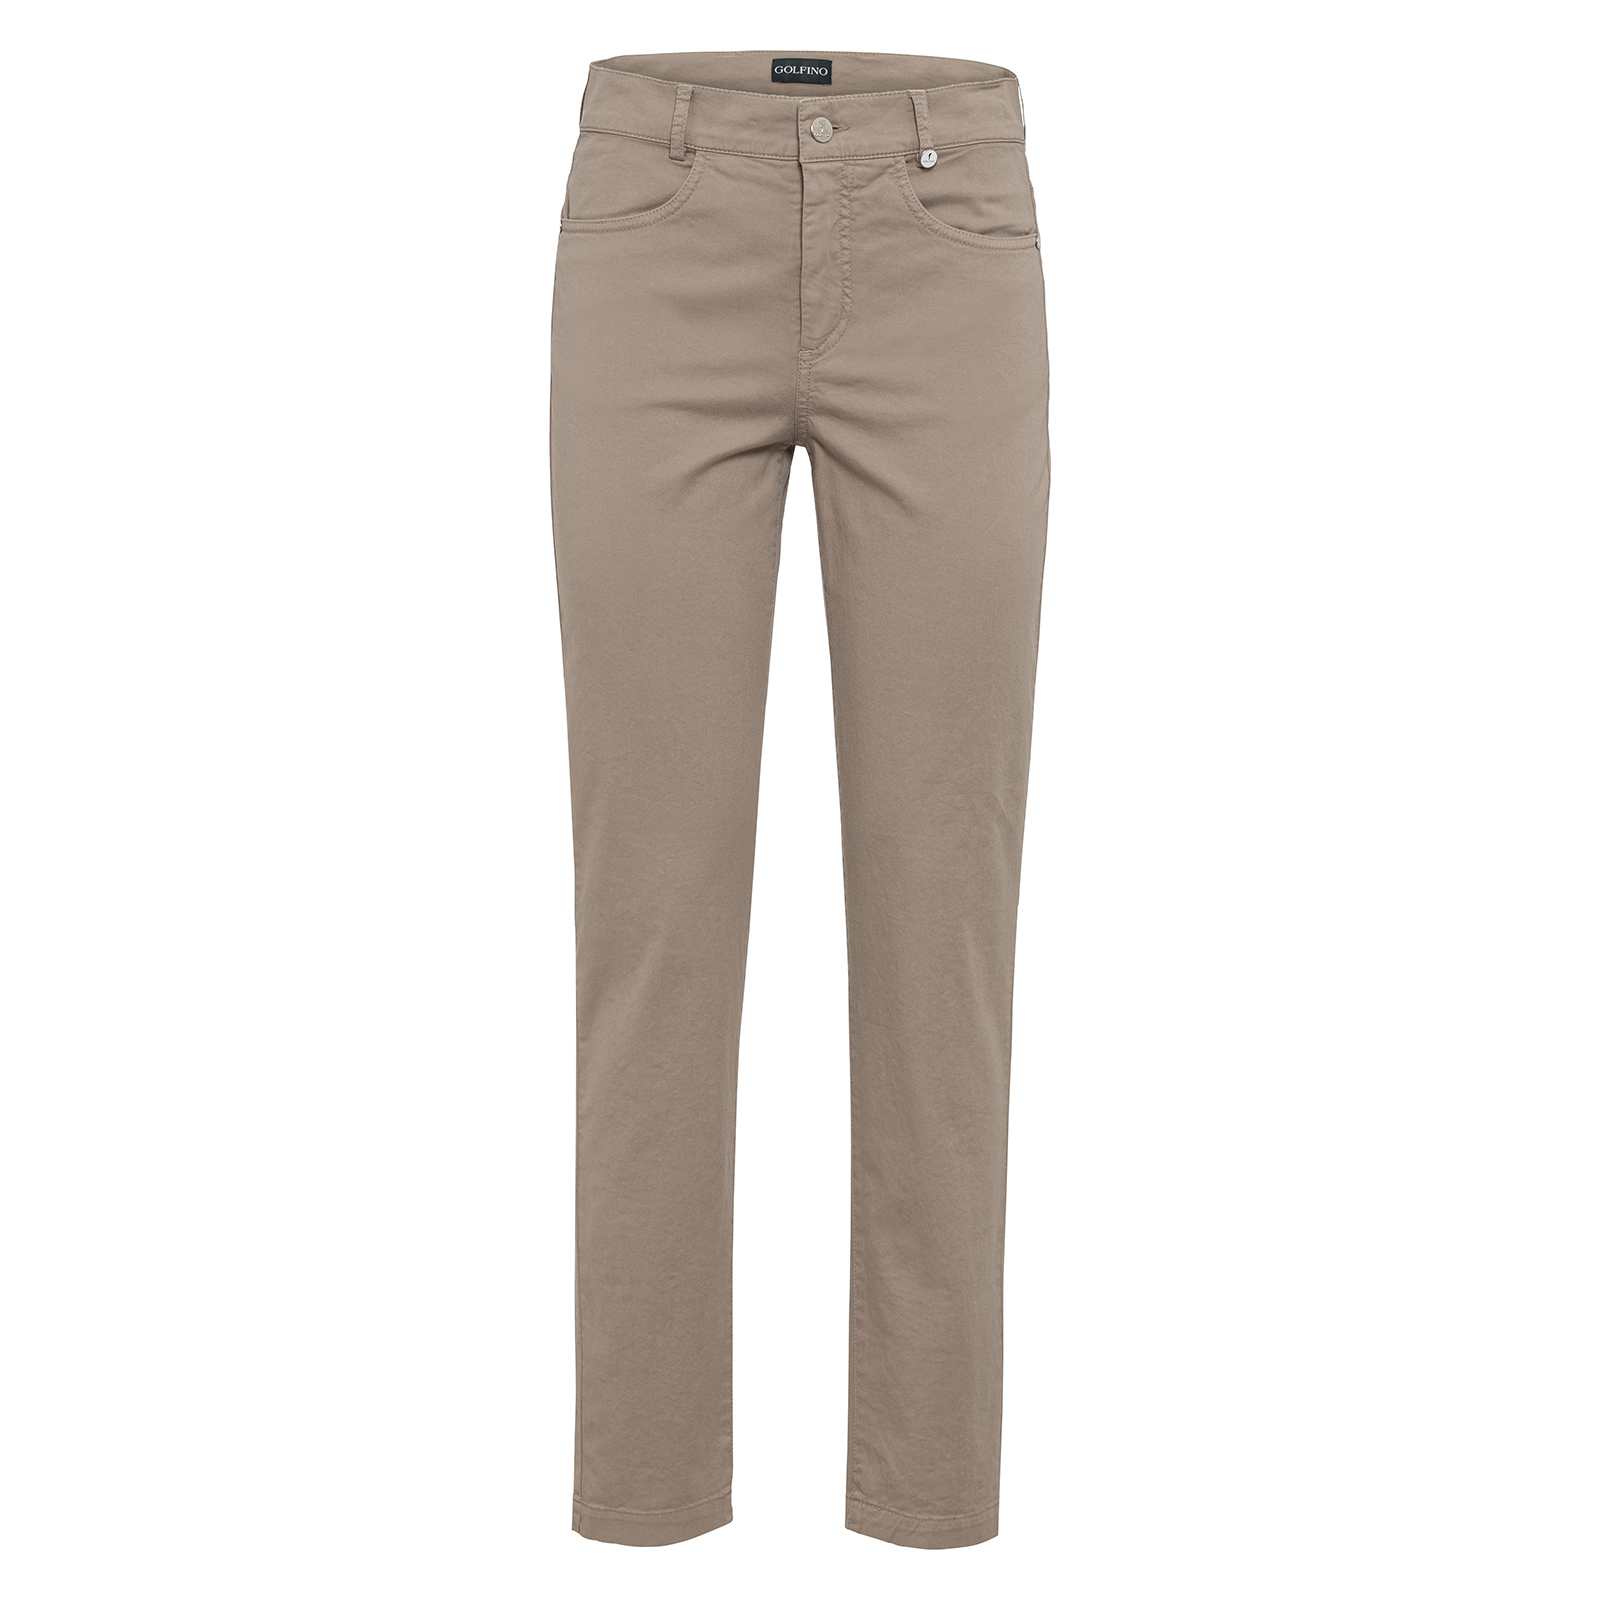 Soft cotton trousers for Ladies in 7/8 length